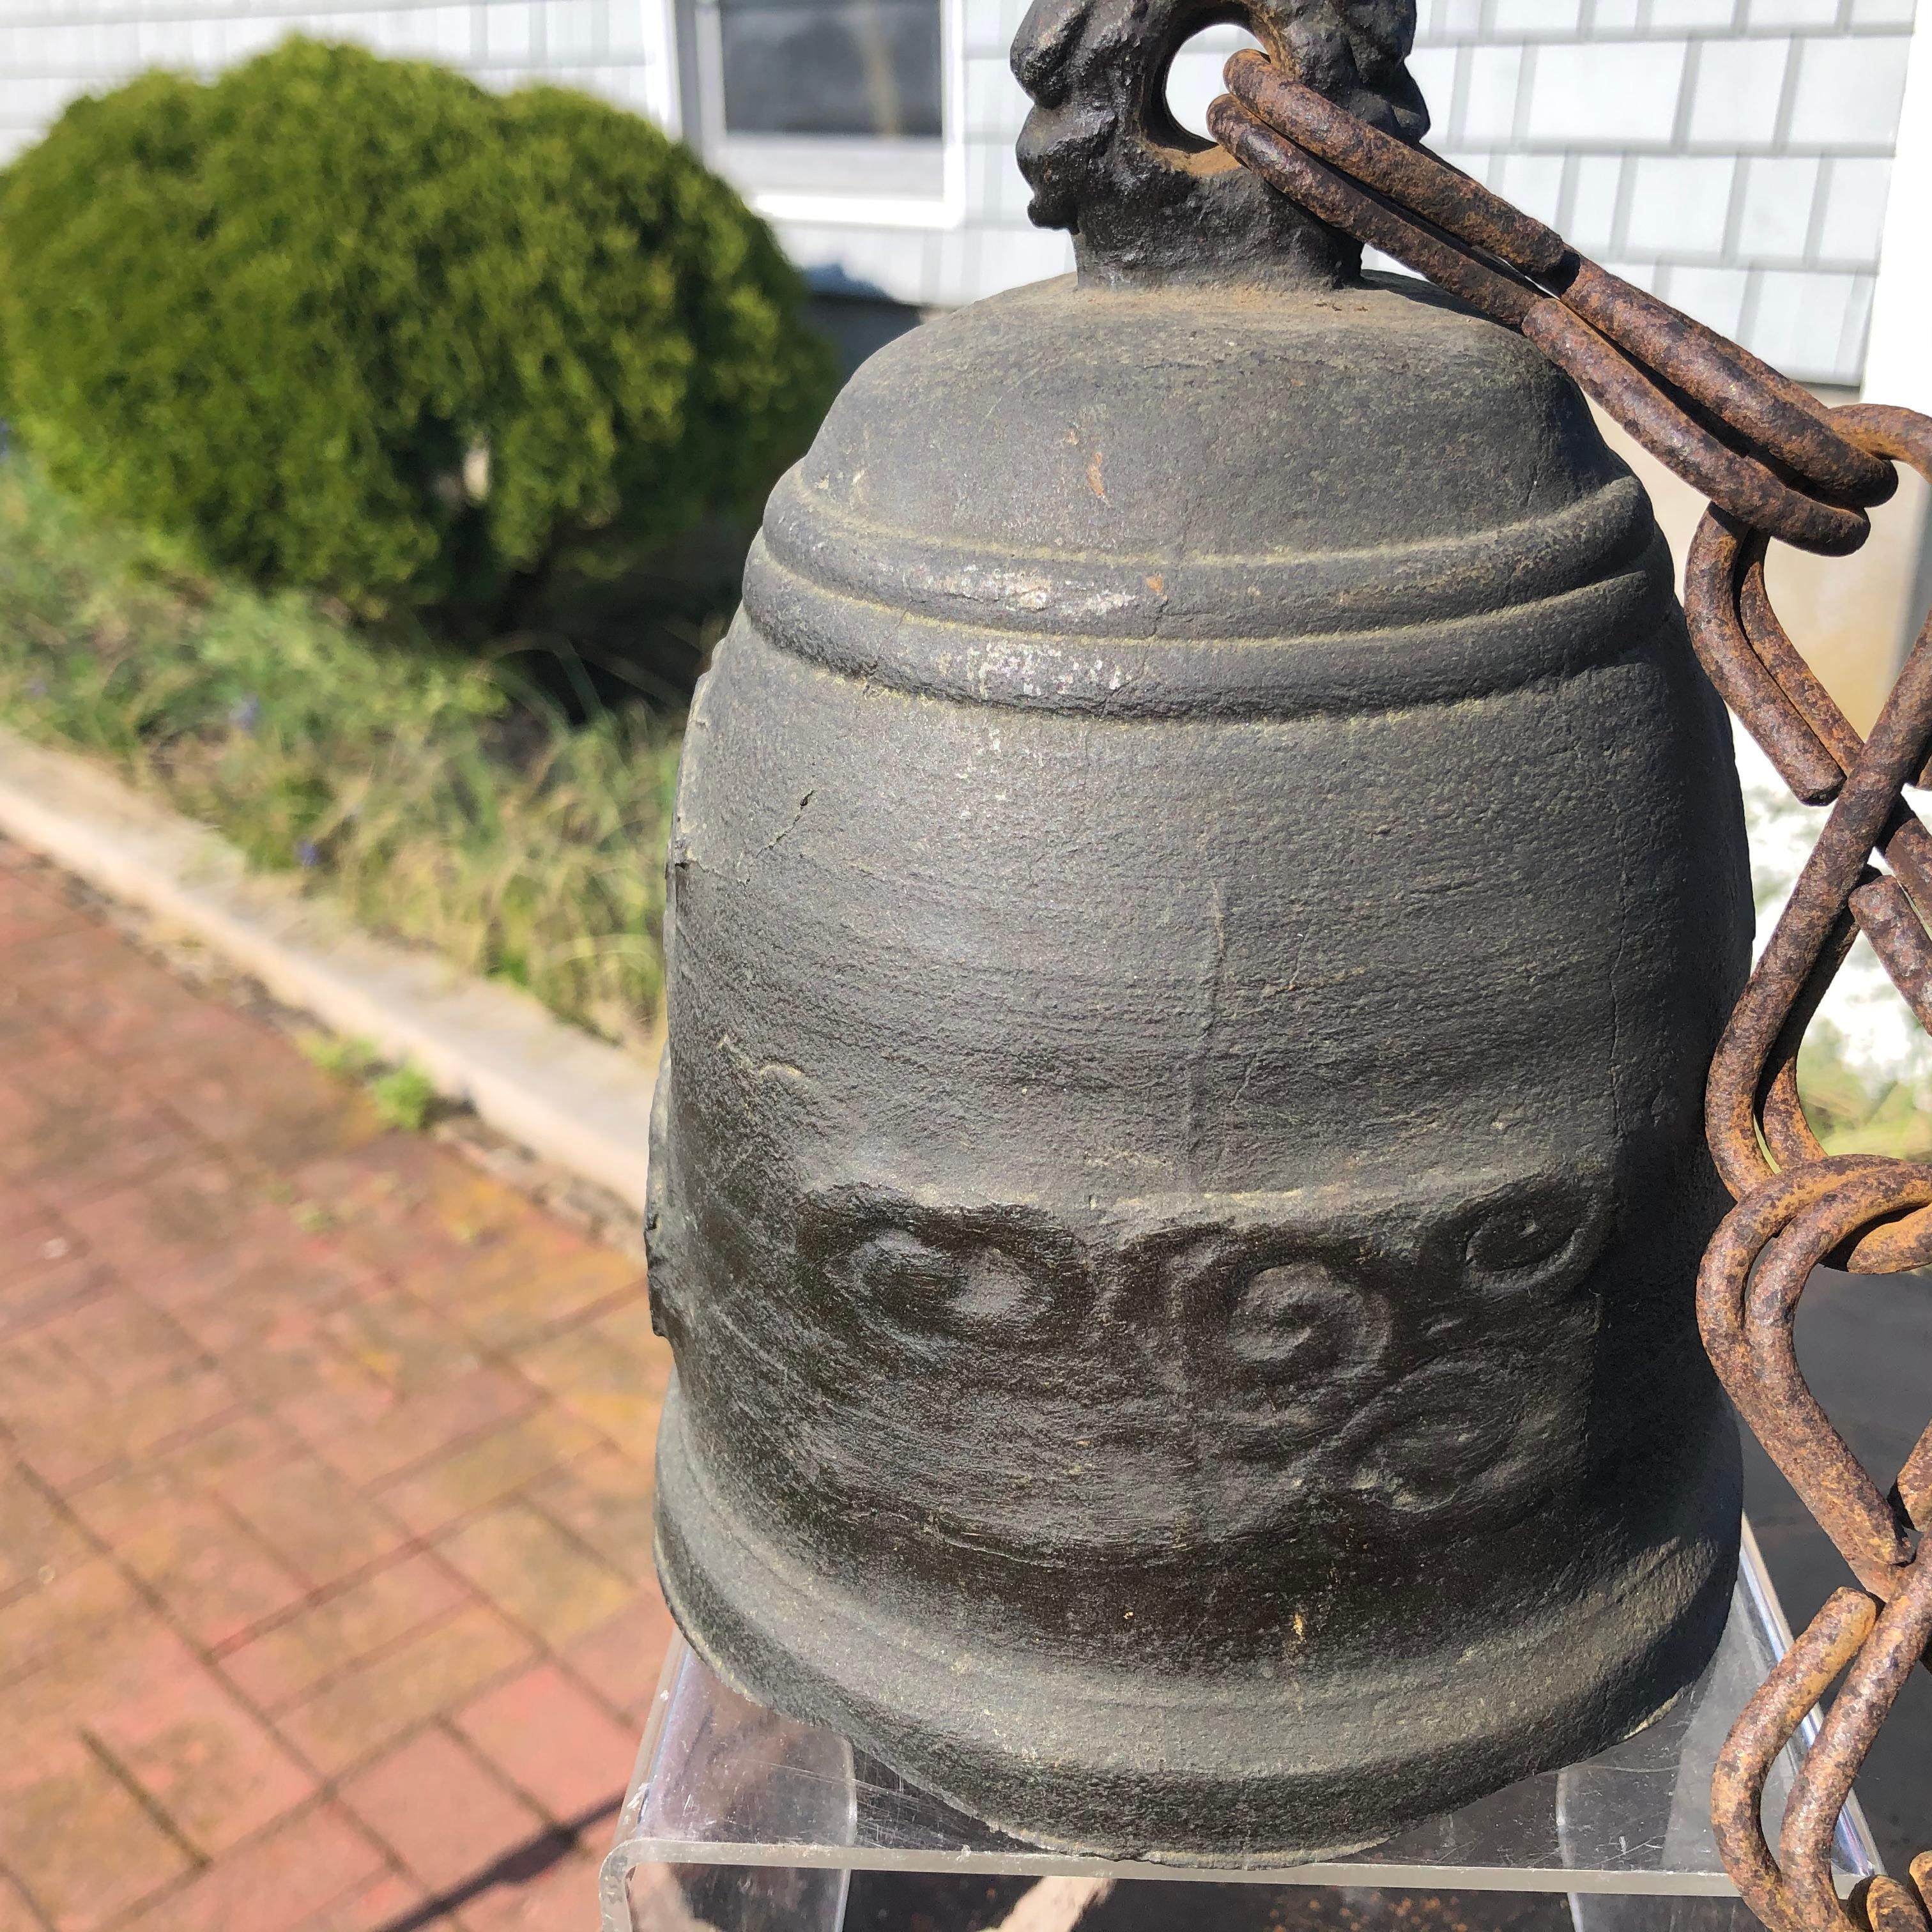 From Japan an unusual find- and excellent candidate to accent your indoor or outdoor garden space. 

This is an antique bronze casting of a wonderful medium scale temple bell complete with an unusual 